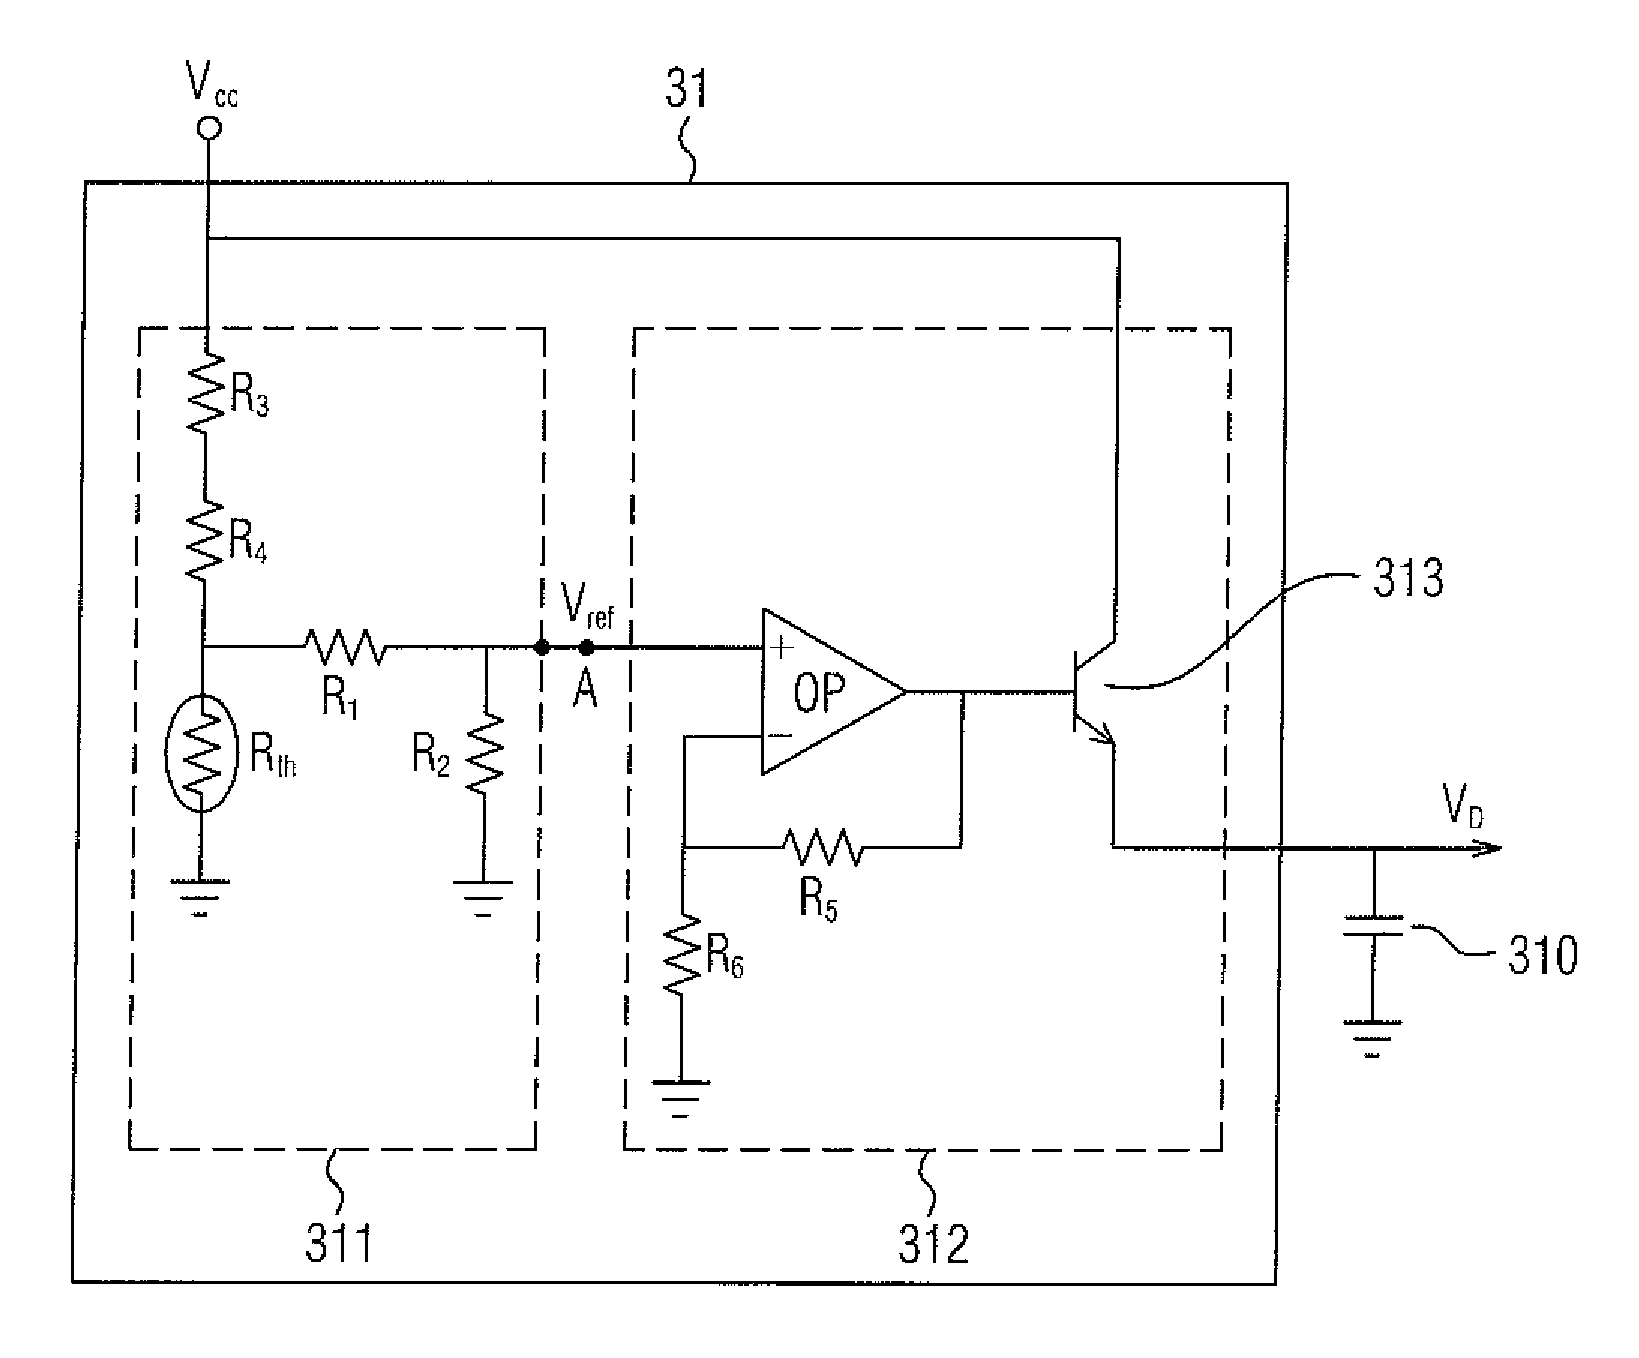 Thermal control variable-speed circuit without switching noise